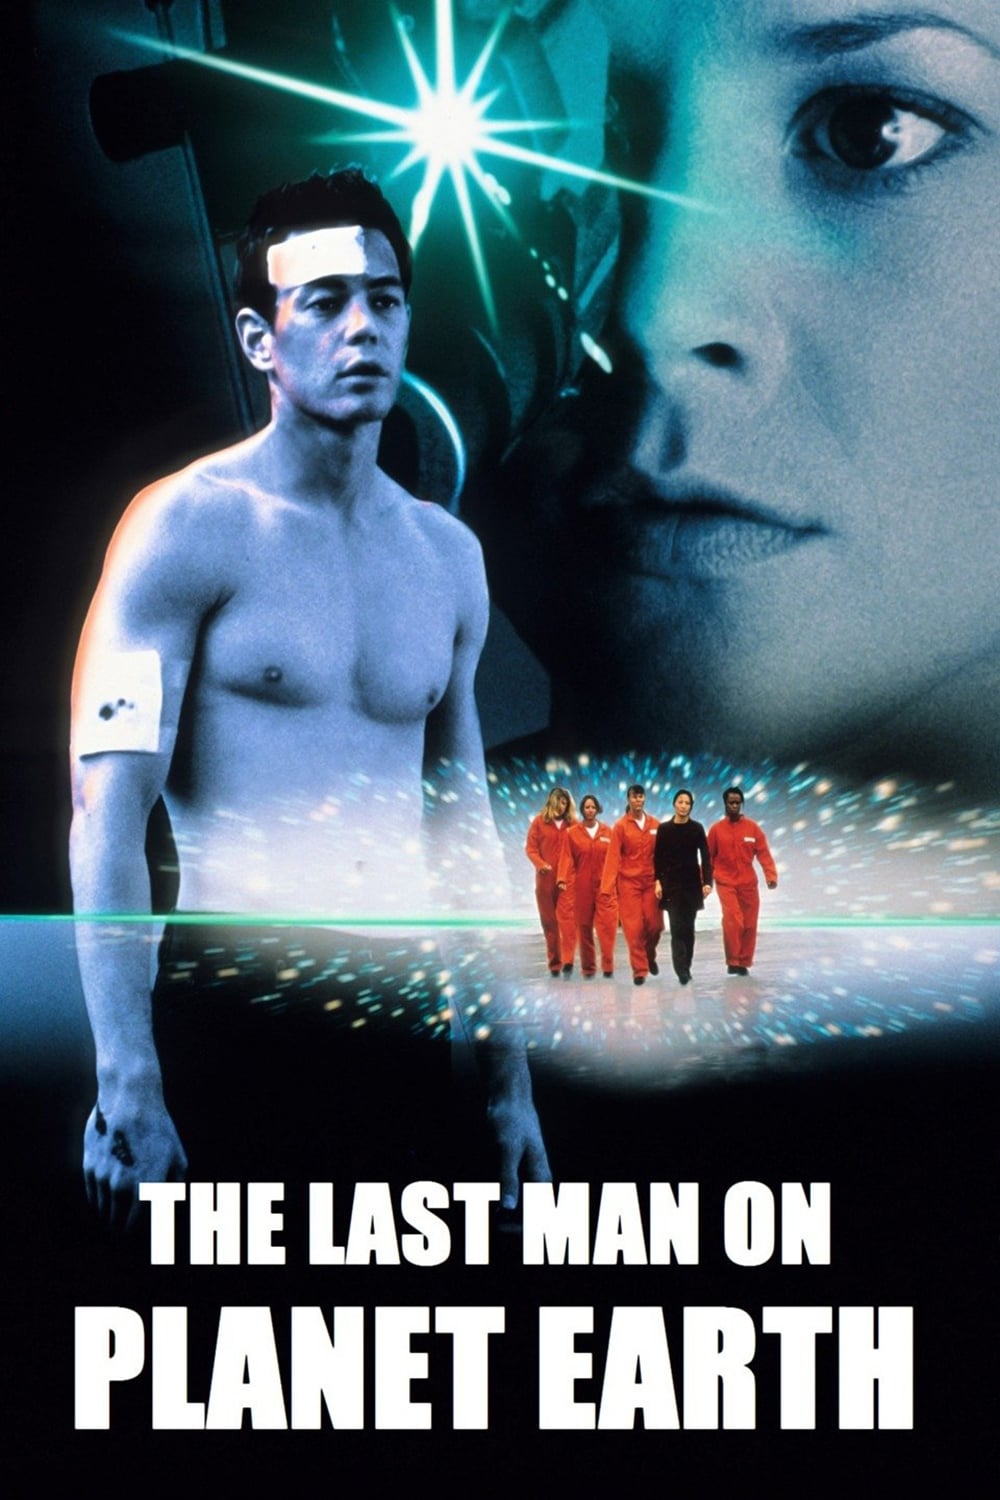 The Last Man on Planet Earth (1999)